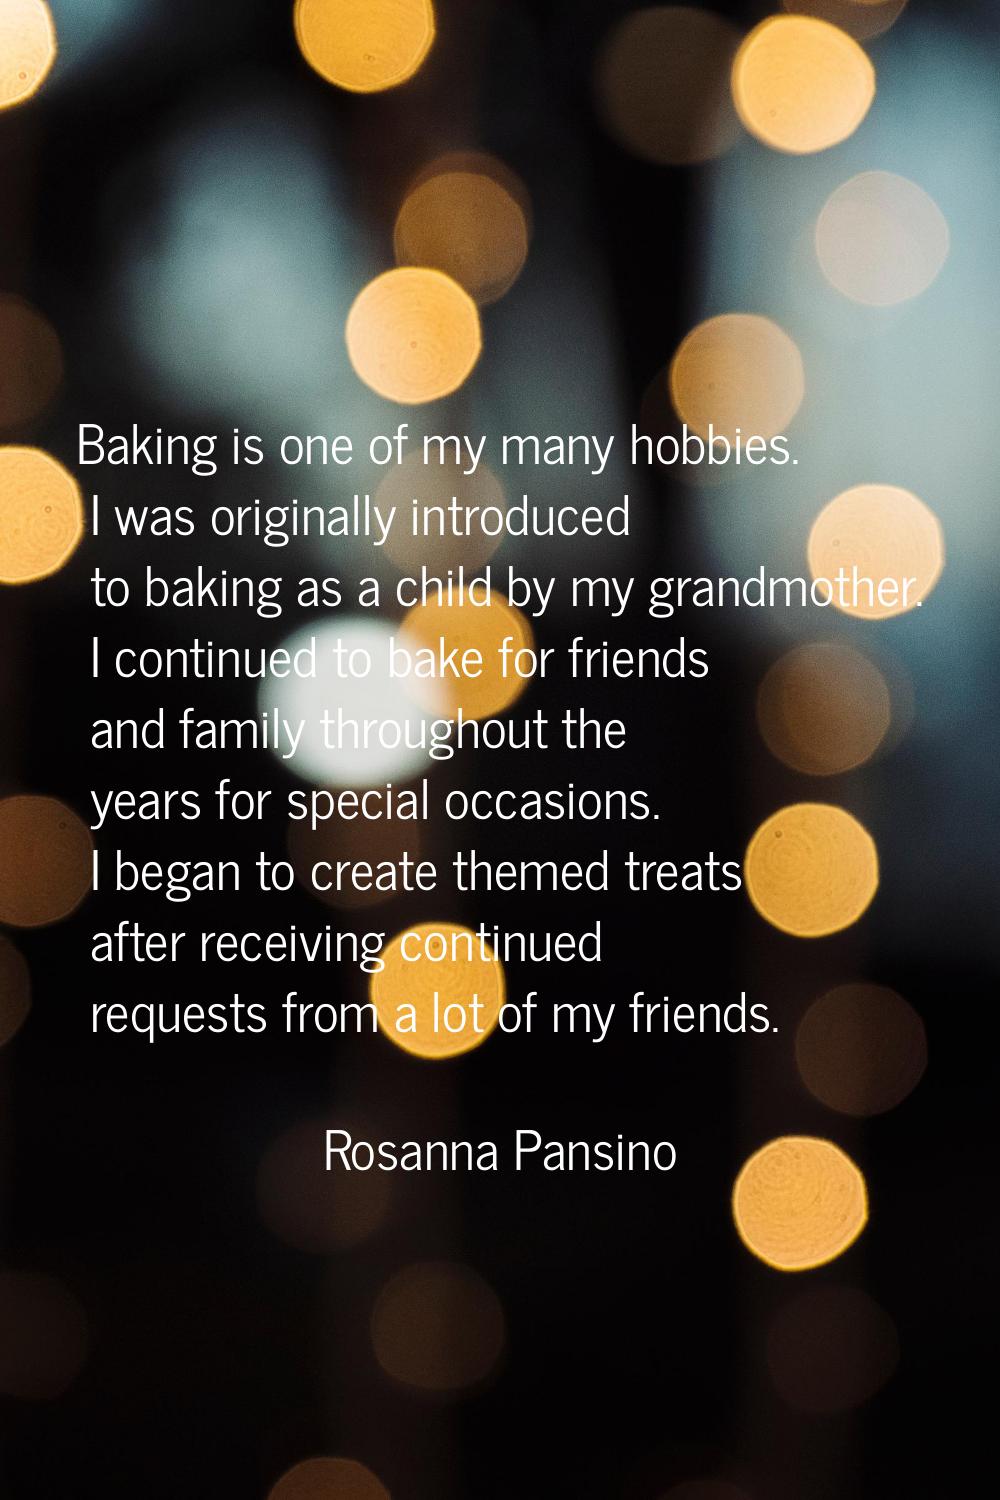 Baking is one of my many hobbies. I was originally introduced to baking as a child by my grandmothe